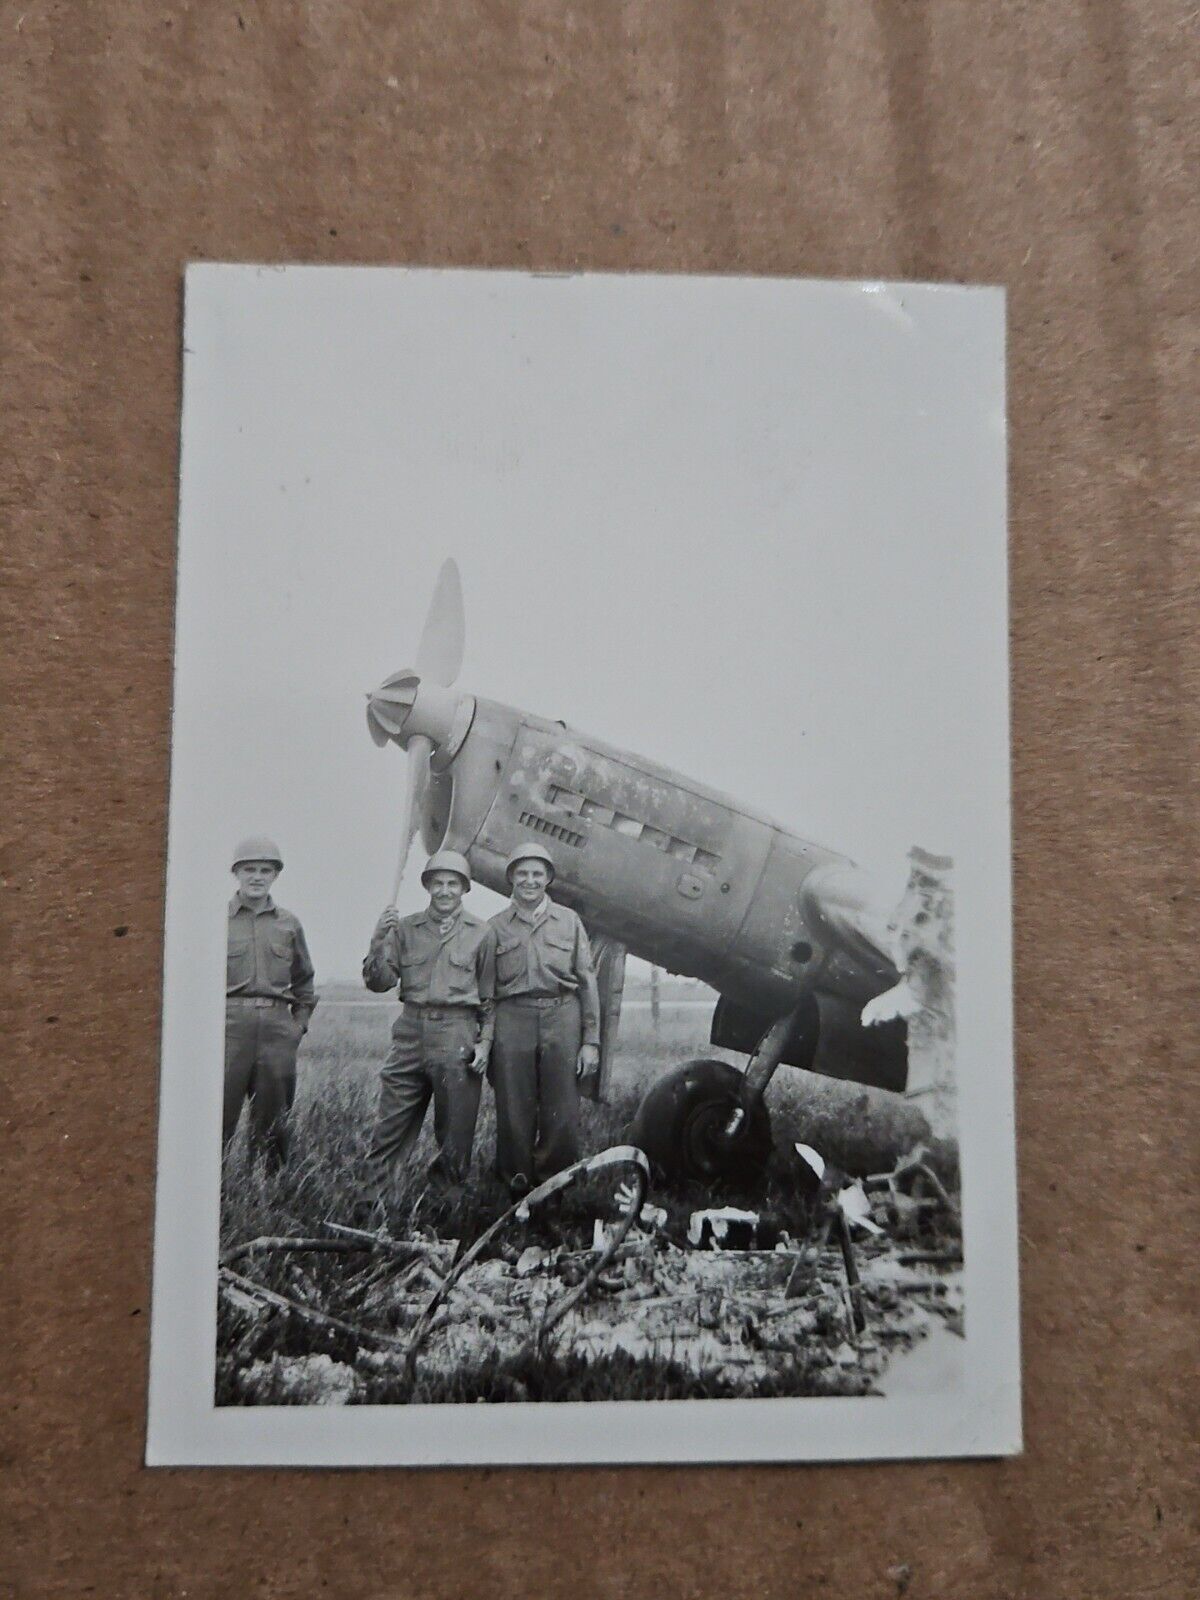 Original World War 2 Photograph Of Soldiers In Front Of Captured German Aircraft